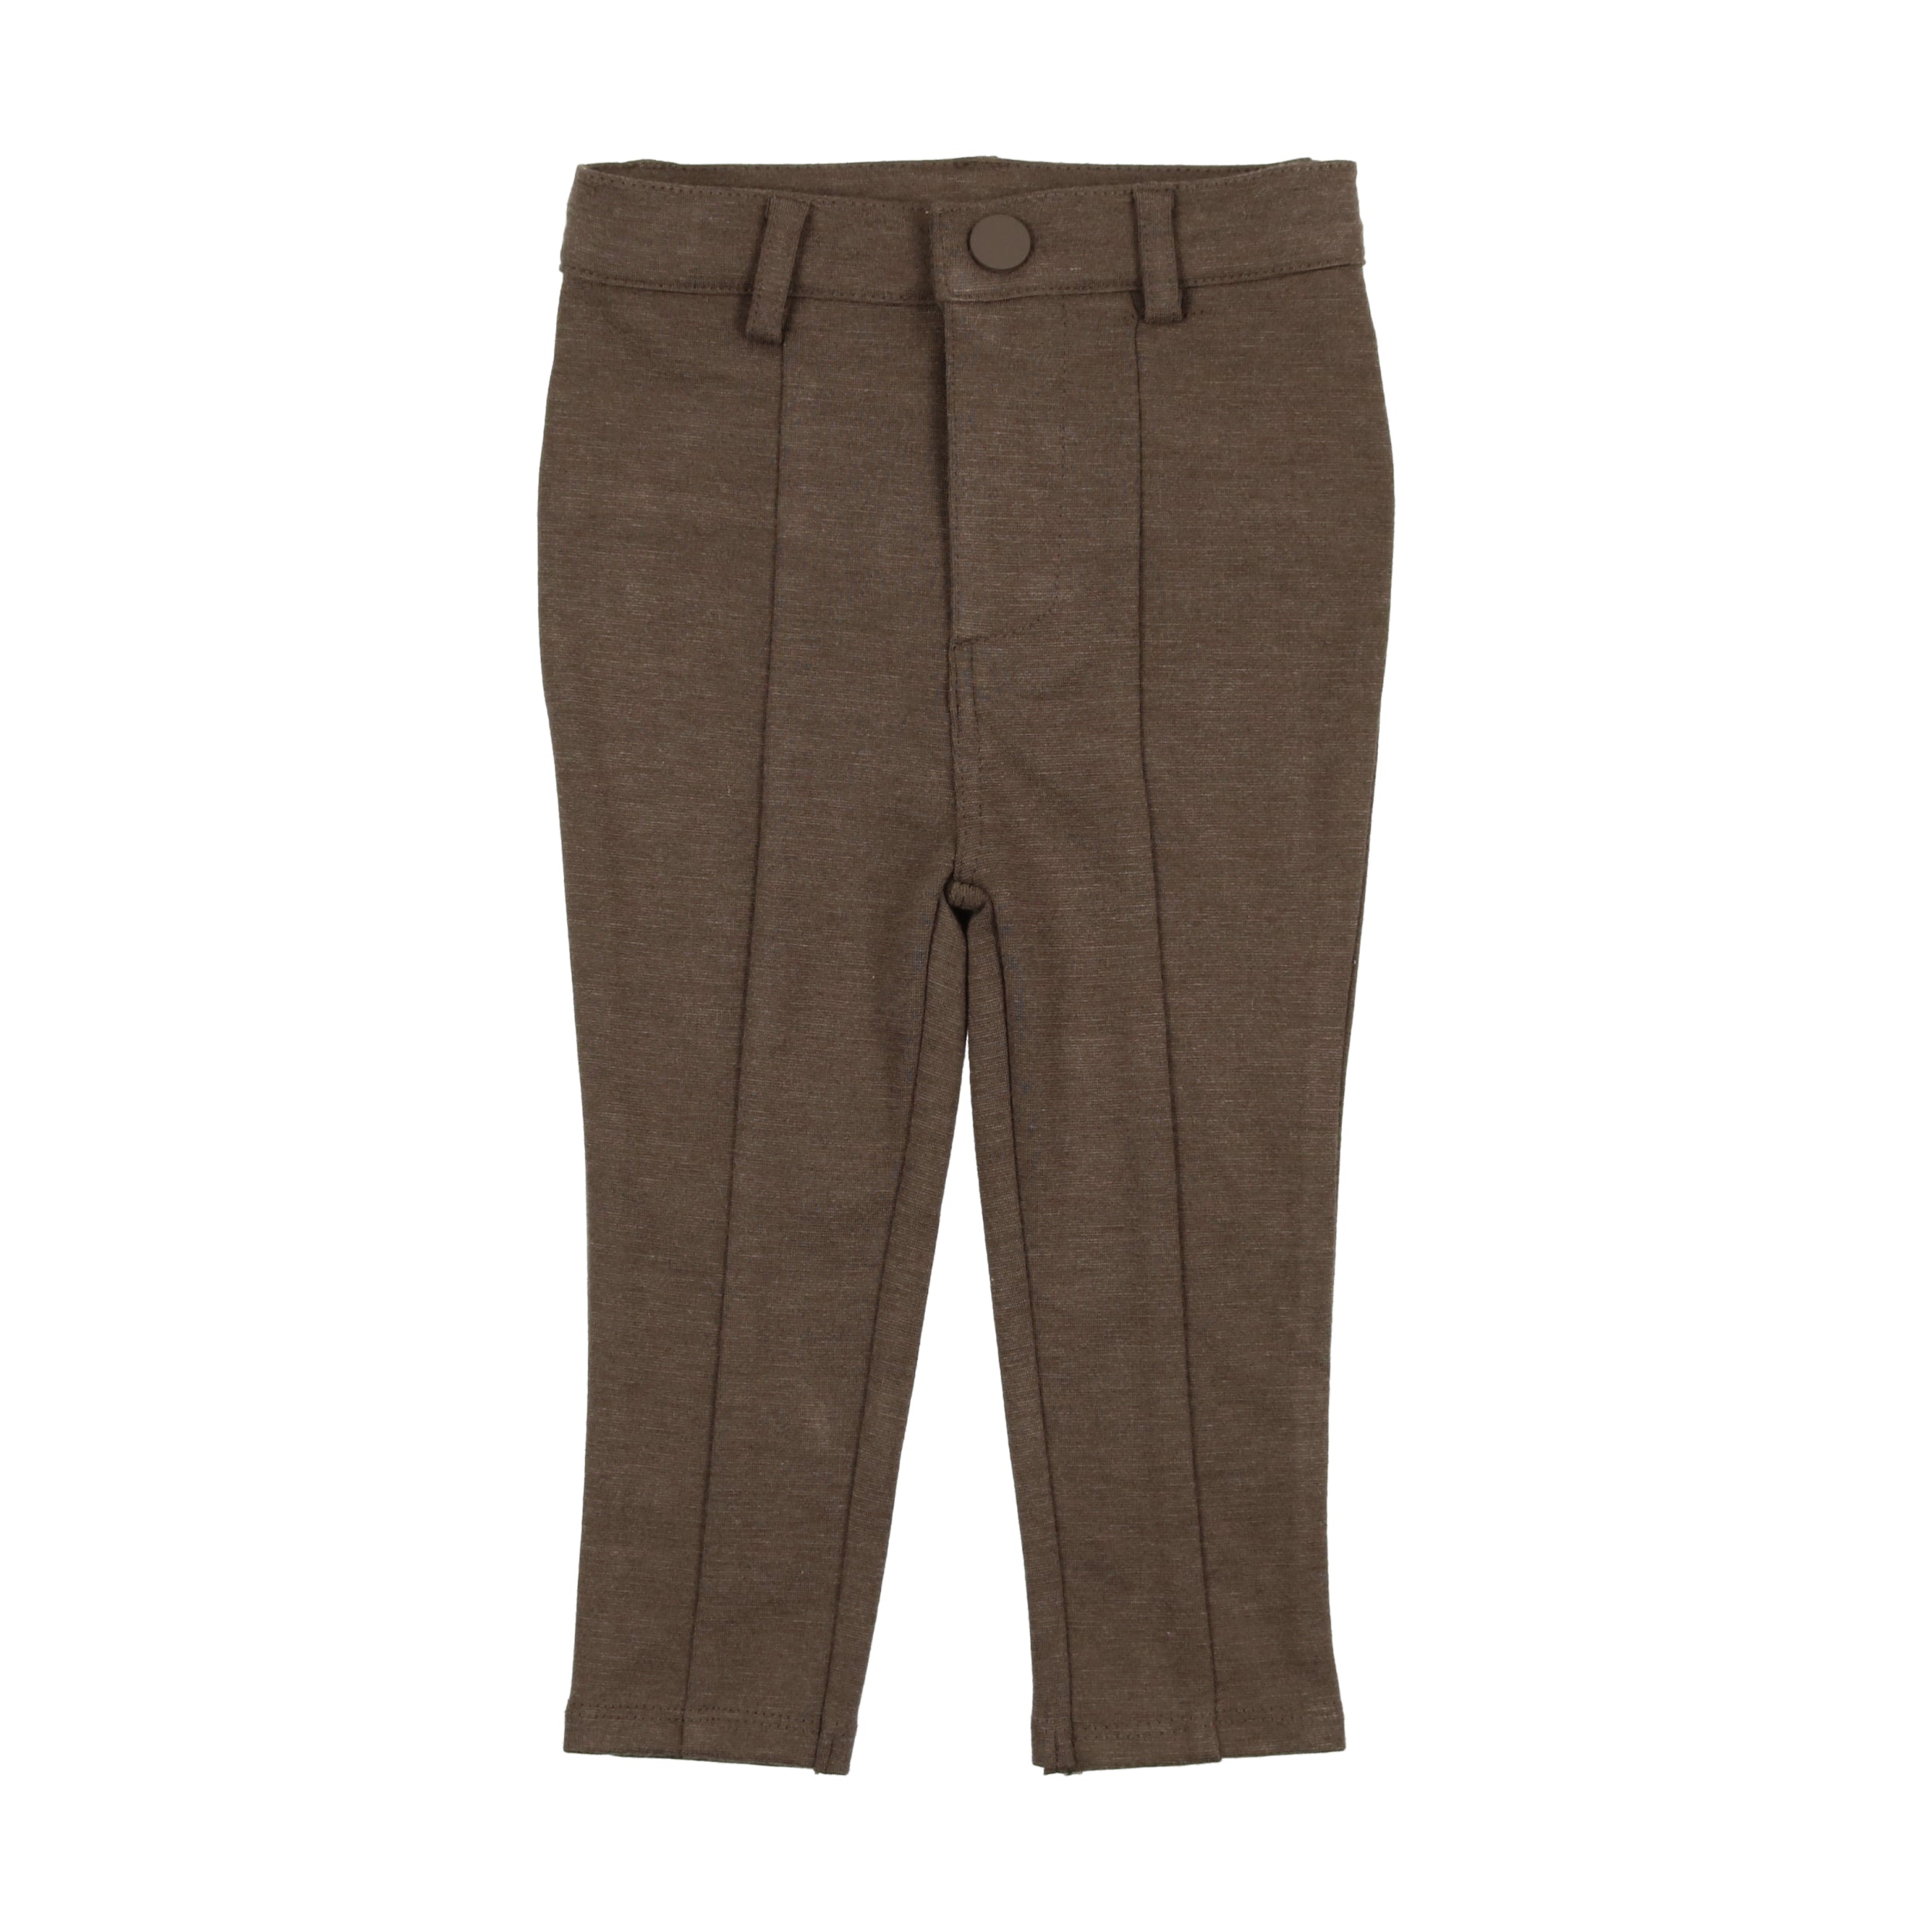 Heather Brown Knit Stretch Pants with Seam